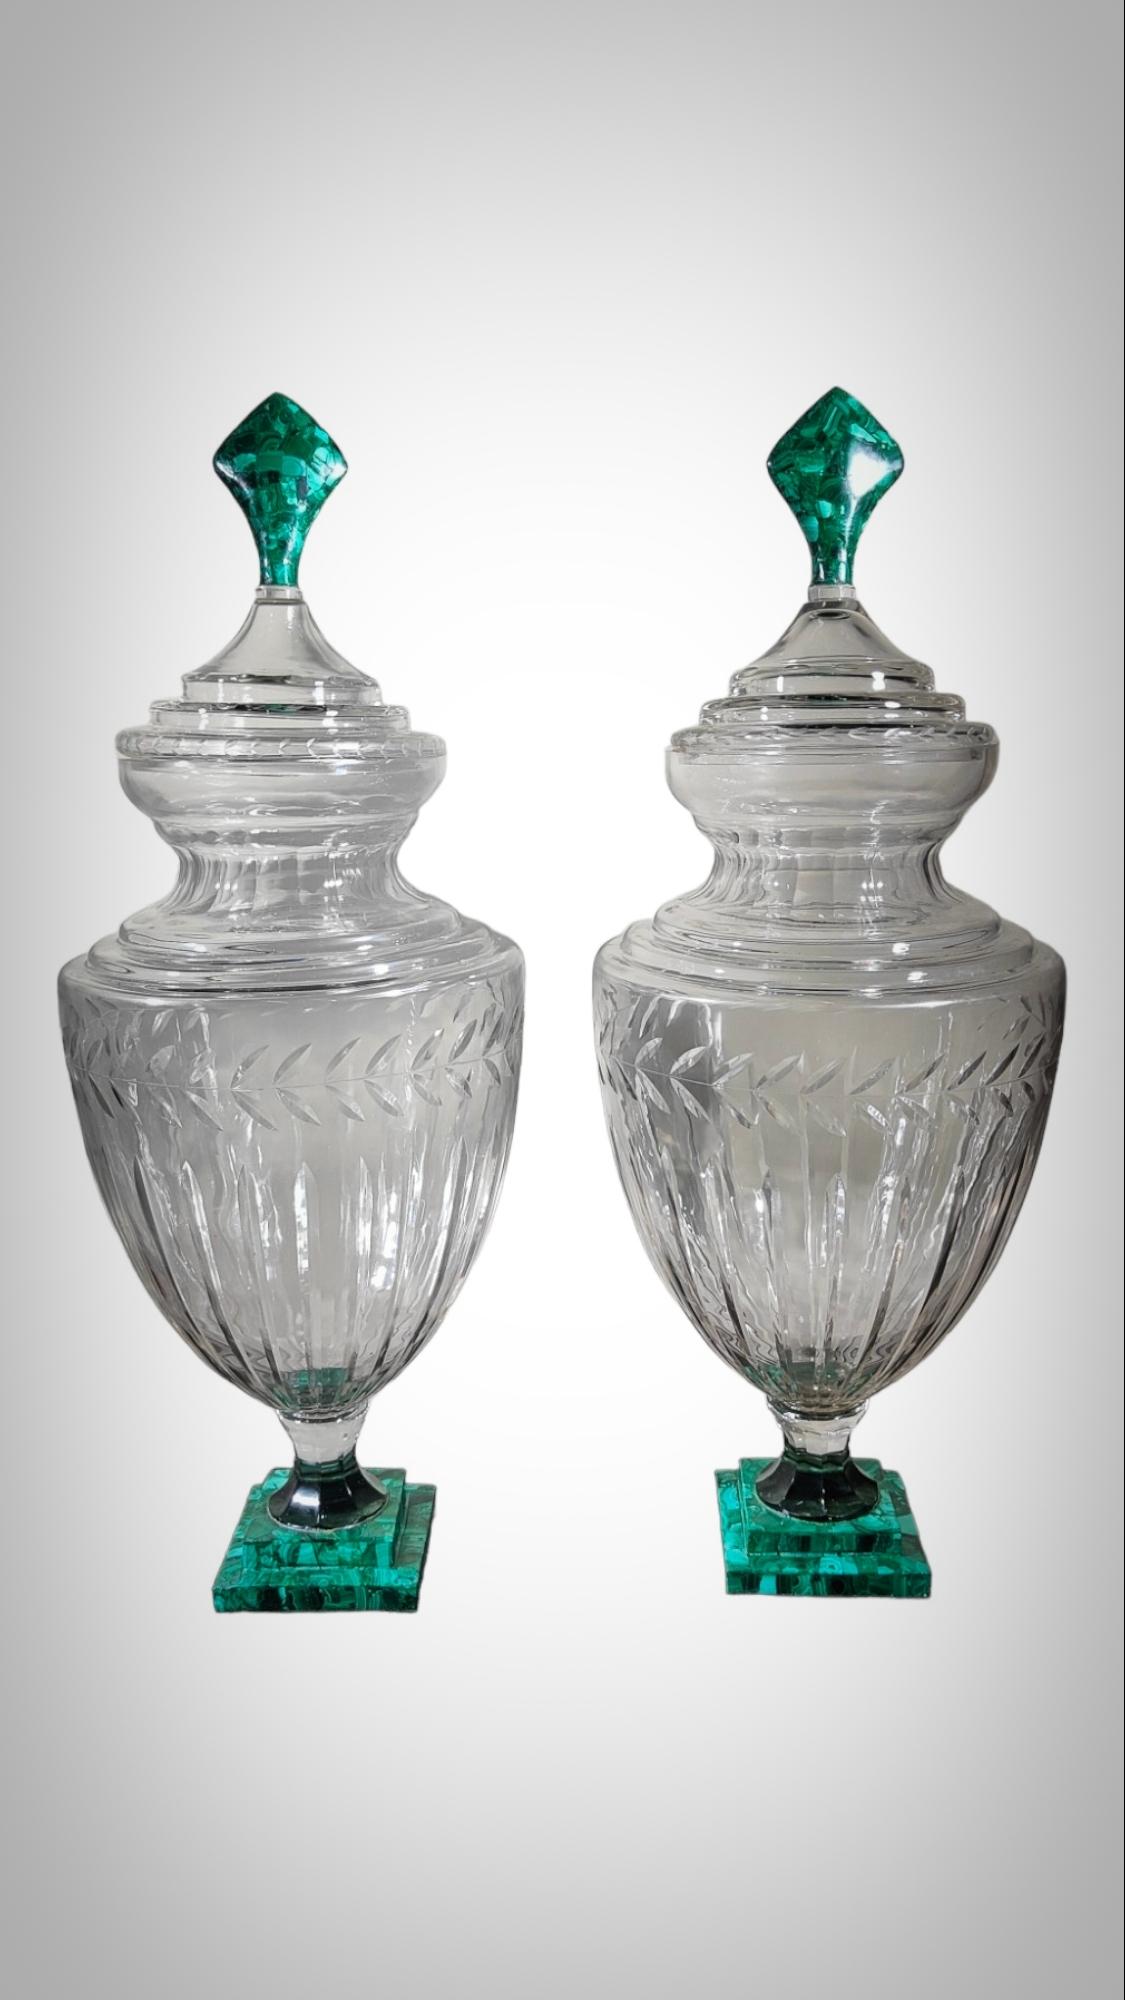 Large Pair Of Cut Glass And Malachite Vases
Huge cut glass and malachite vases from the 1950s. Very decorative. They are in perfect condition. Italian work. Dimensions: 75 cm high and 30 cm in diameter.